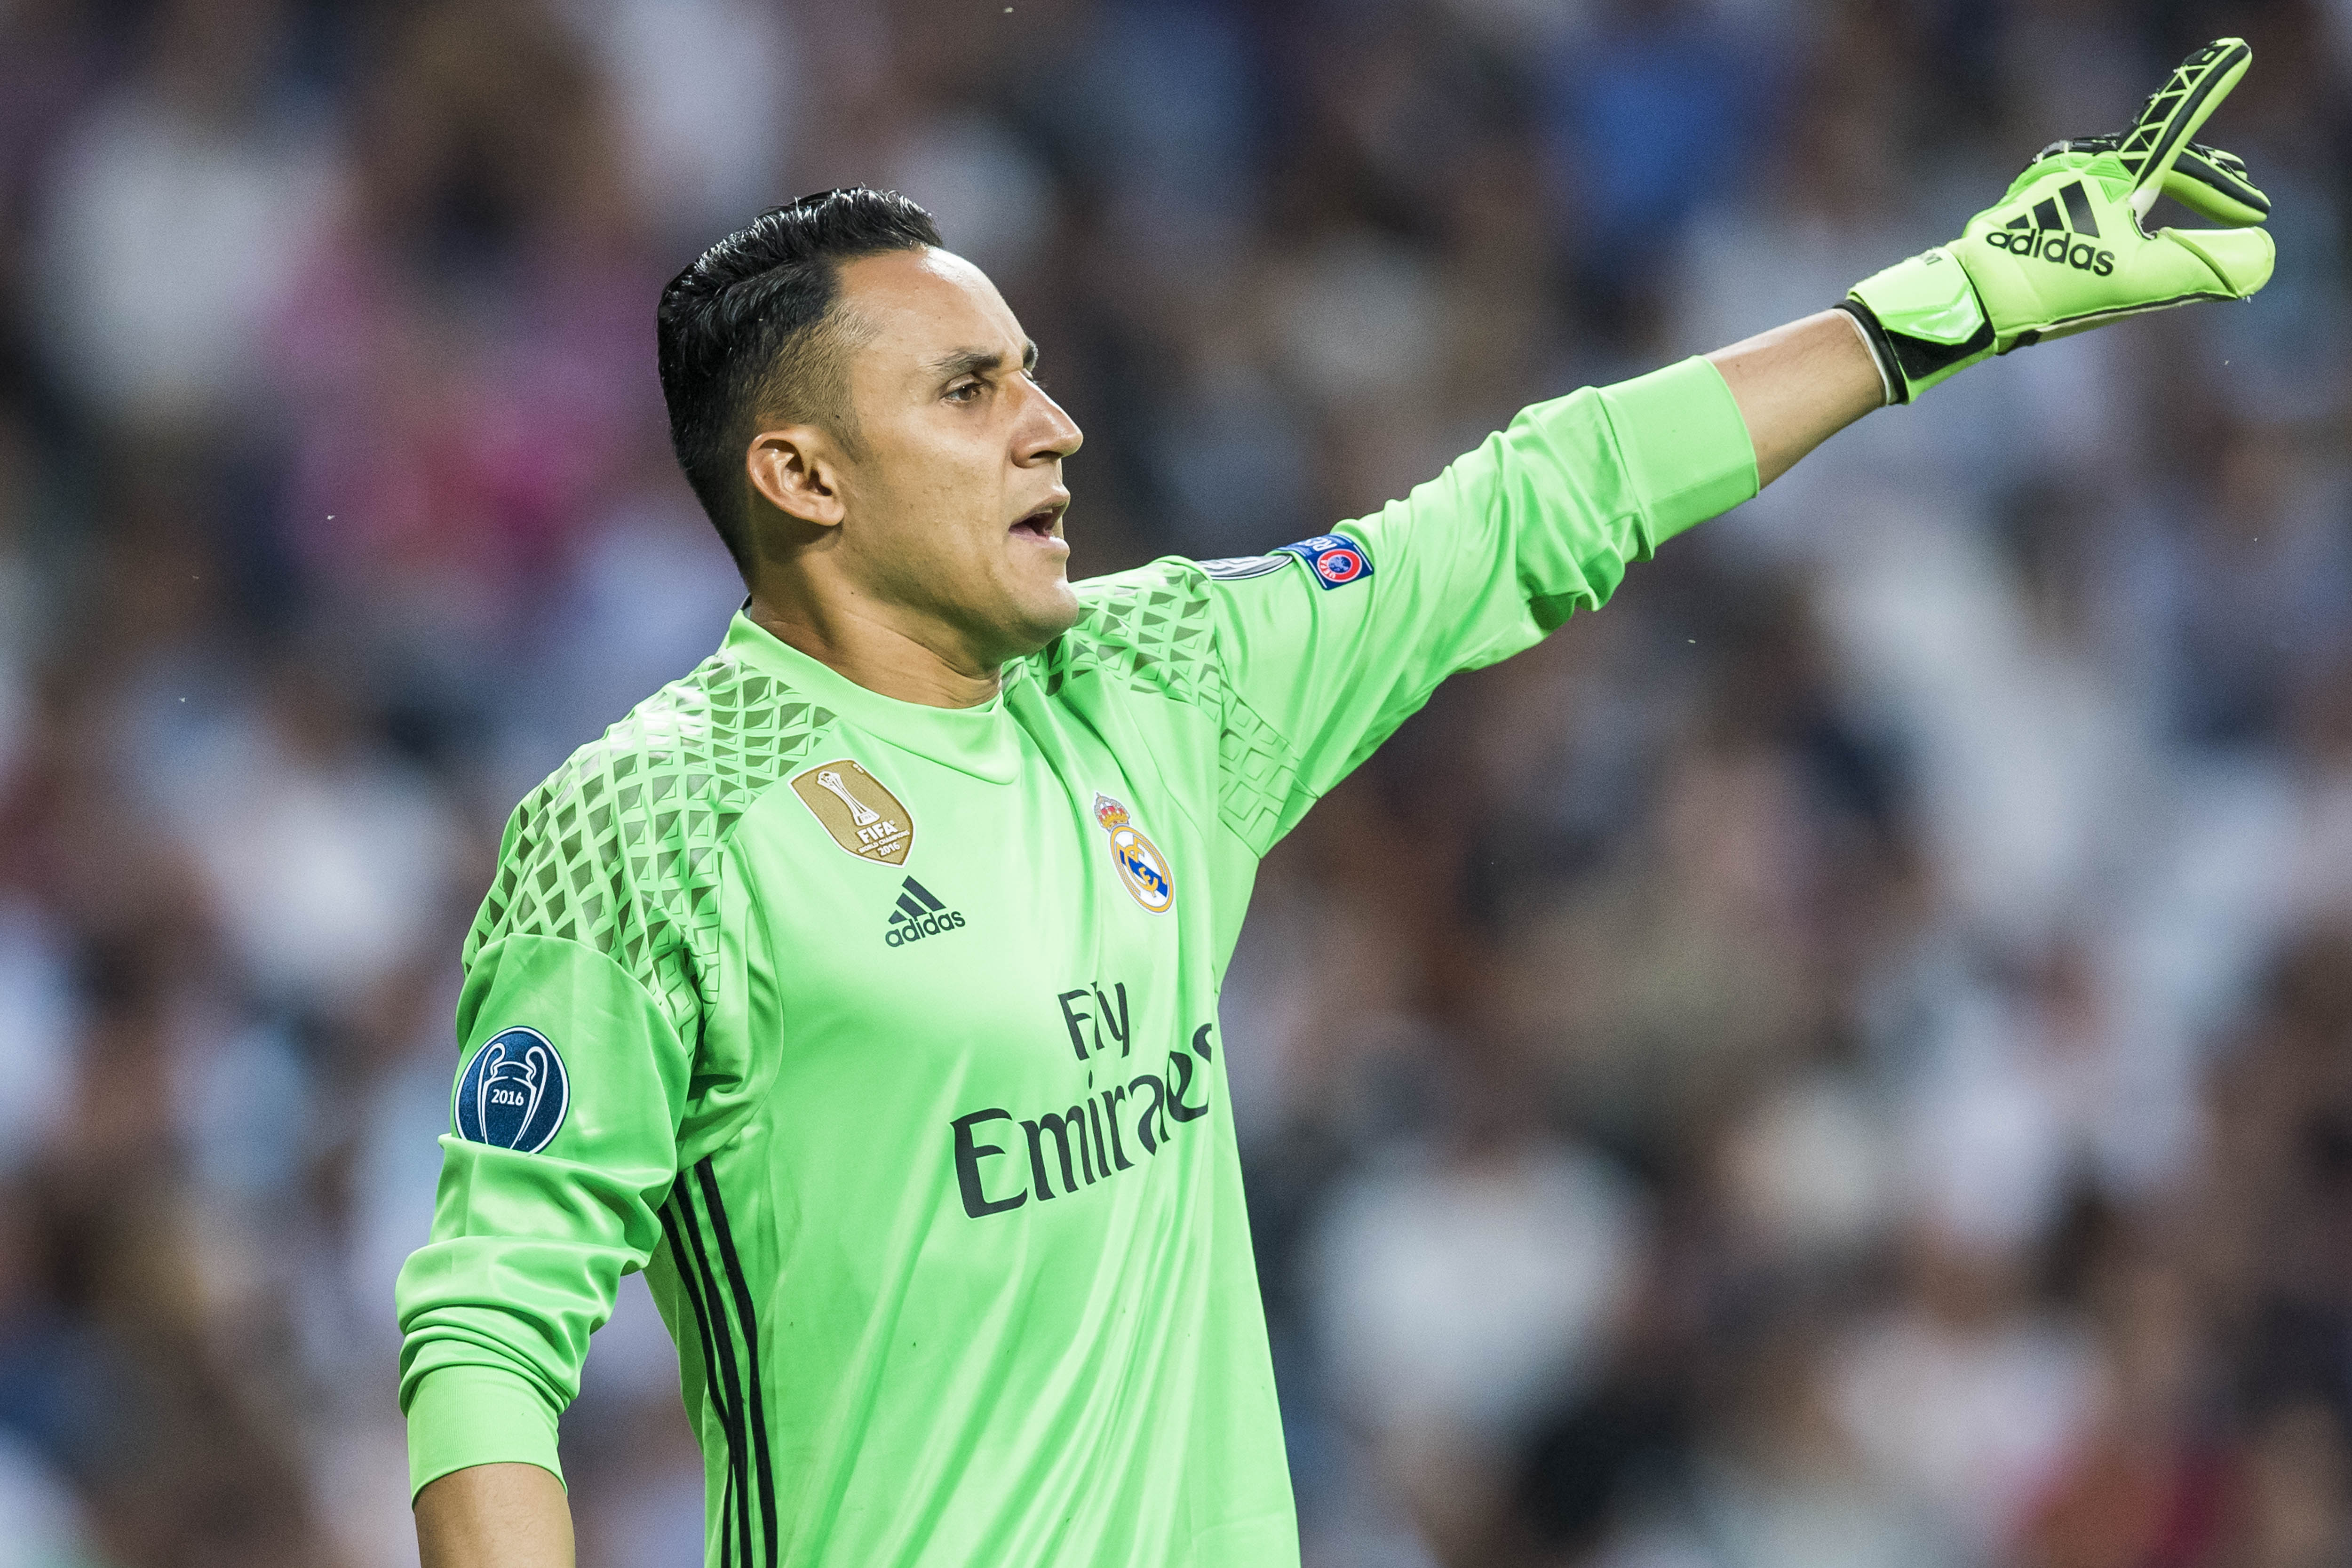 Keylor Navas in action for Real Madrid against Atletico in the Champions League semi-finals in 2017.